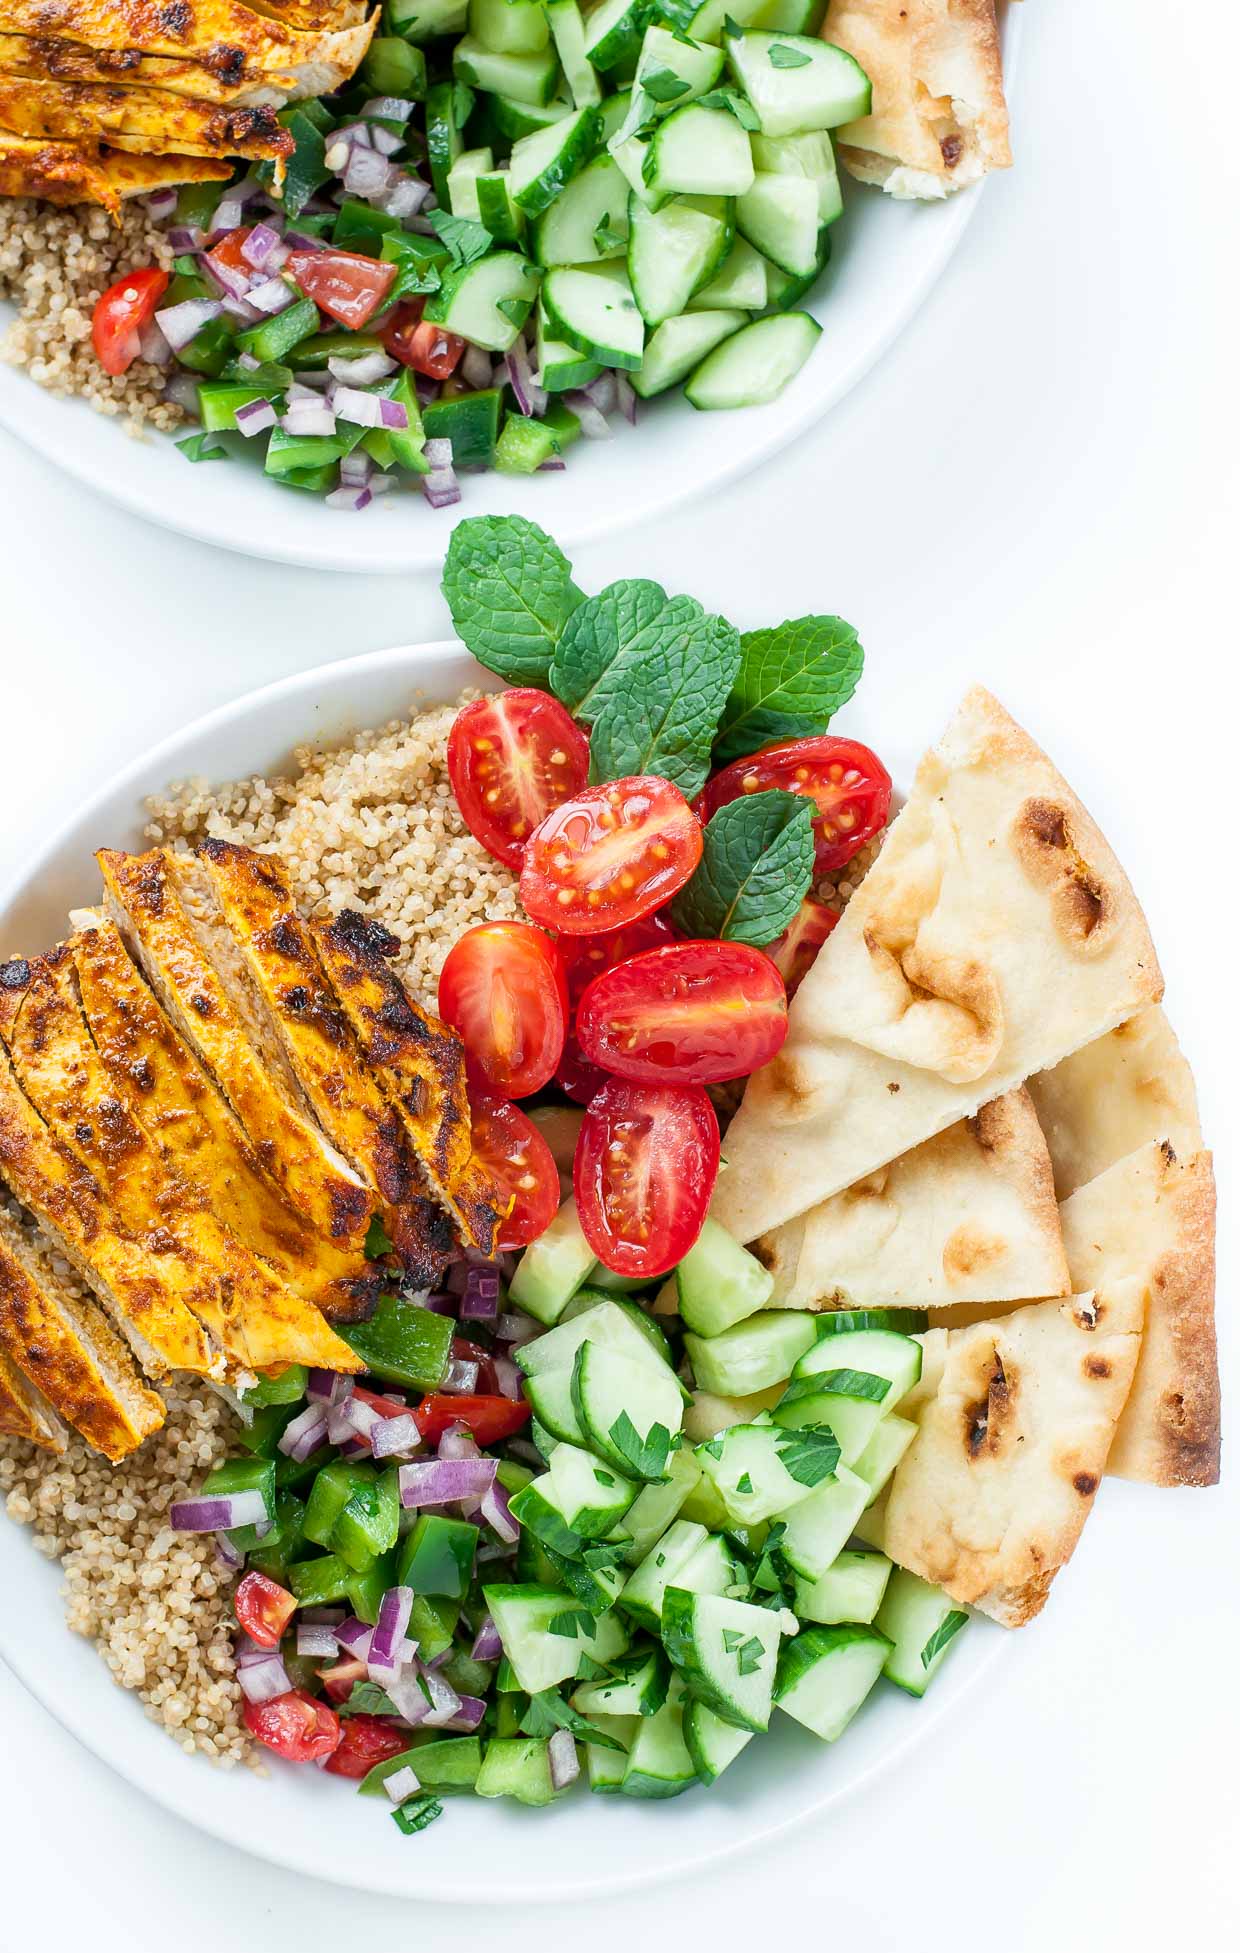 Loving this recipe for healthy Chicken Shawarma Quinoa Bowls with a super easy hack for creating make-ahead lunches for work or school. The flavors are out of this world!!